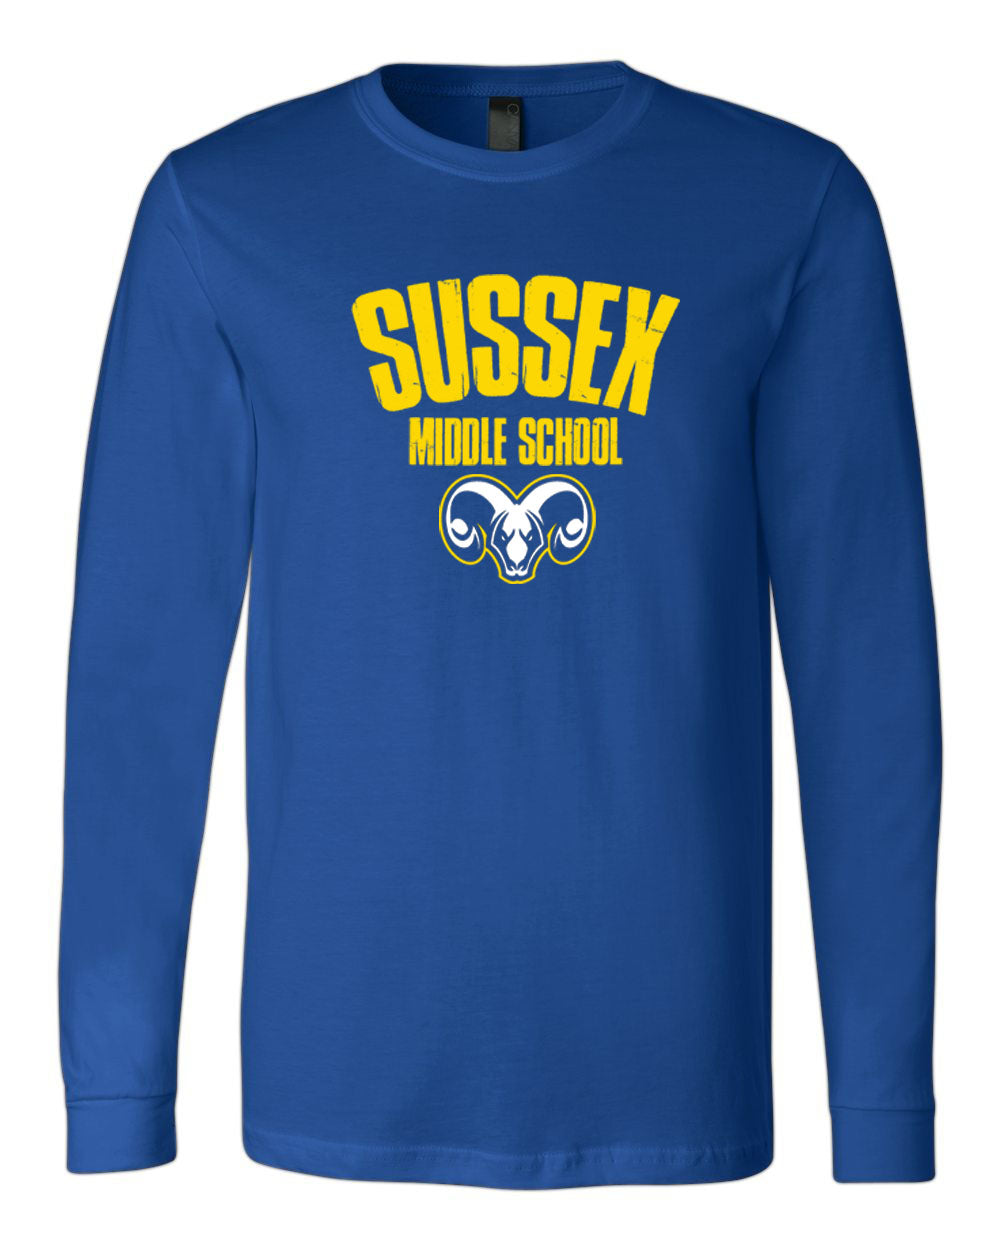 Sussex Middle Design 4 Long Sleeve Shirt